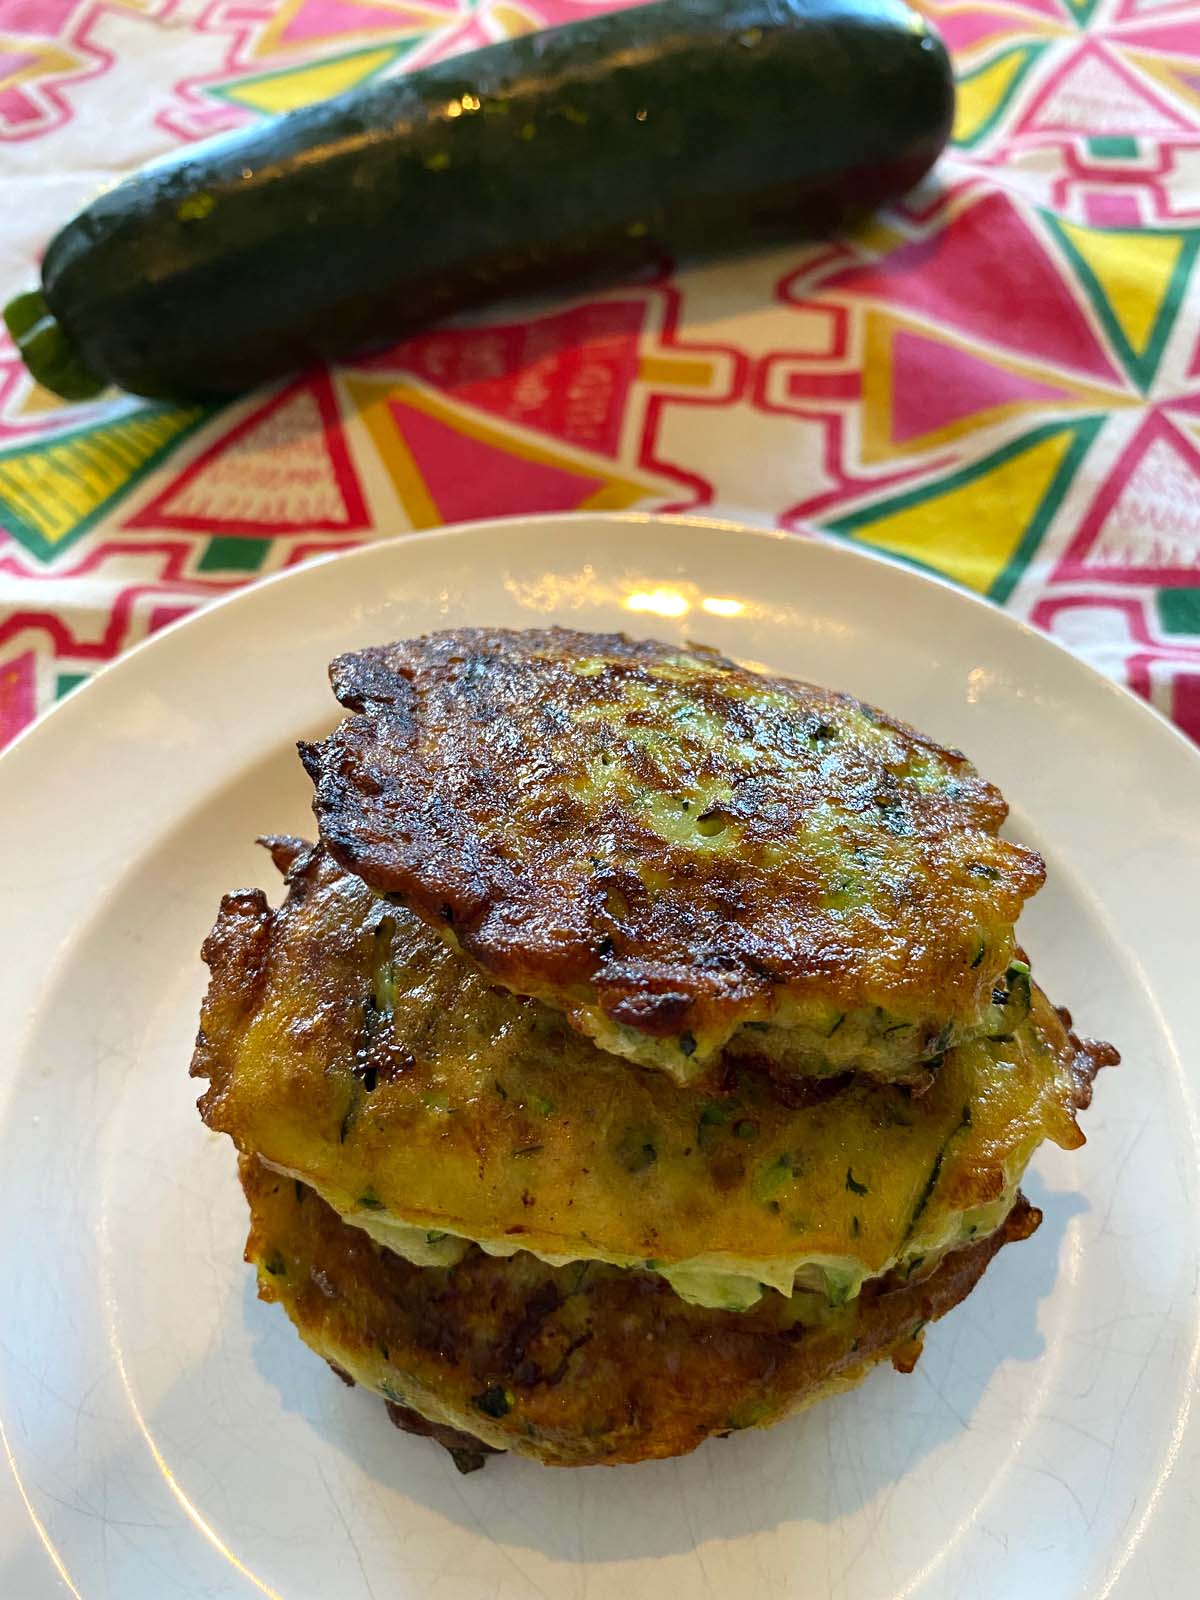 Zucchini pancakes on a plate with a raw zucchini on the side.